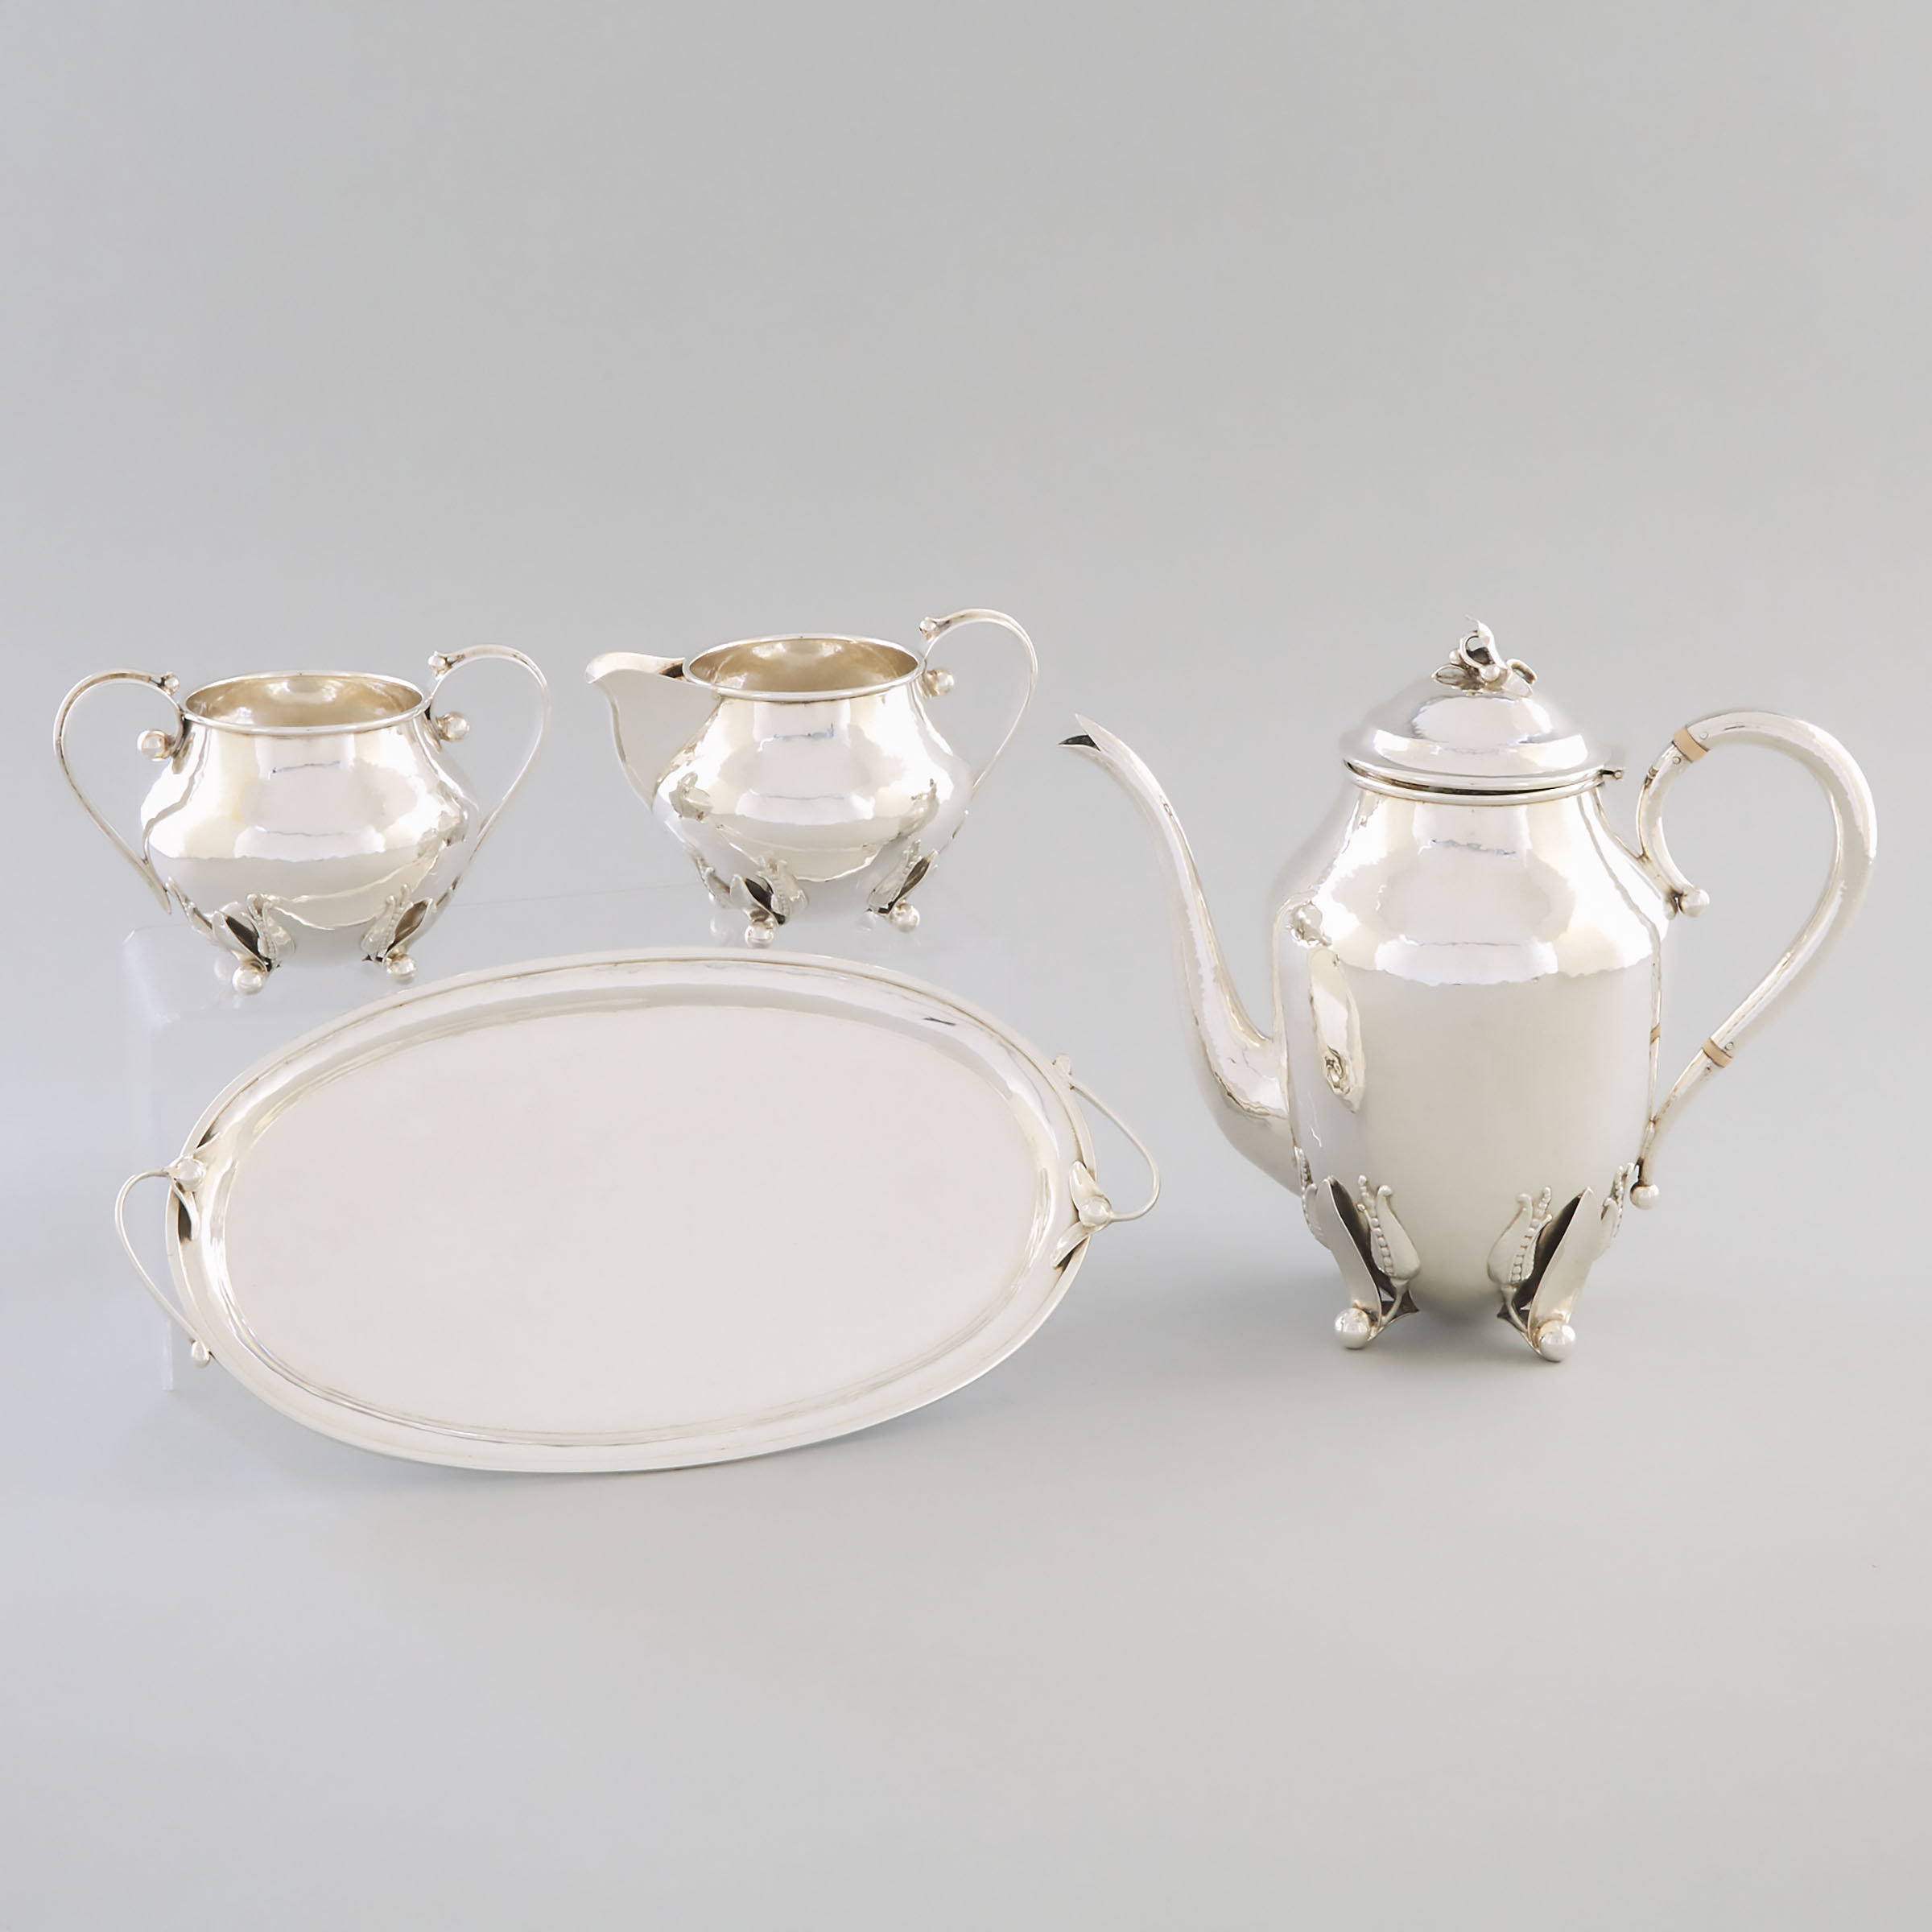 Canadian Silver Coffee Service, Carl Poul Petersen, Montreal, Que., mid-20th century